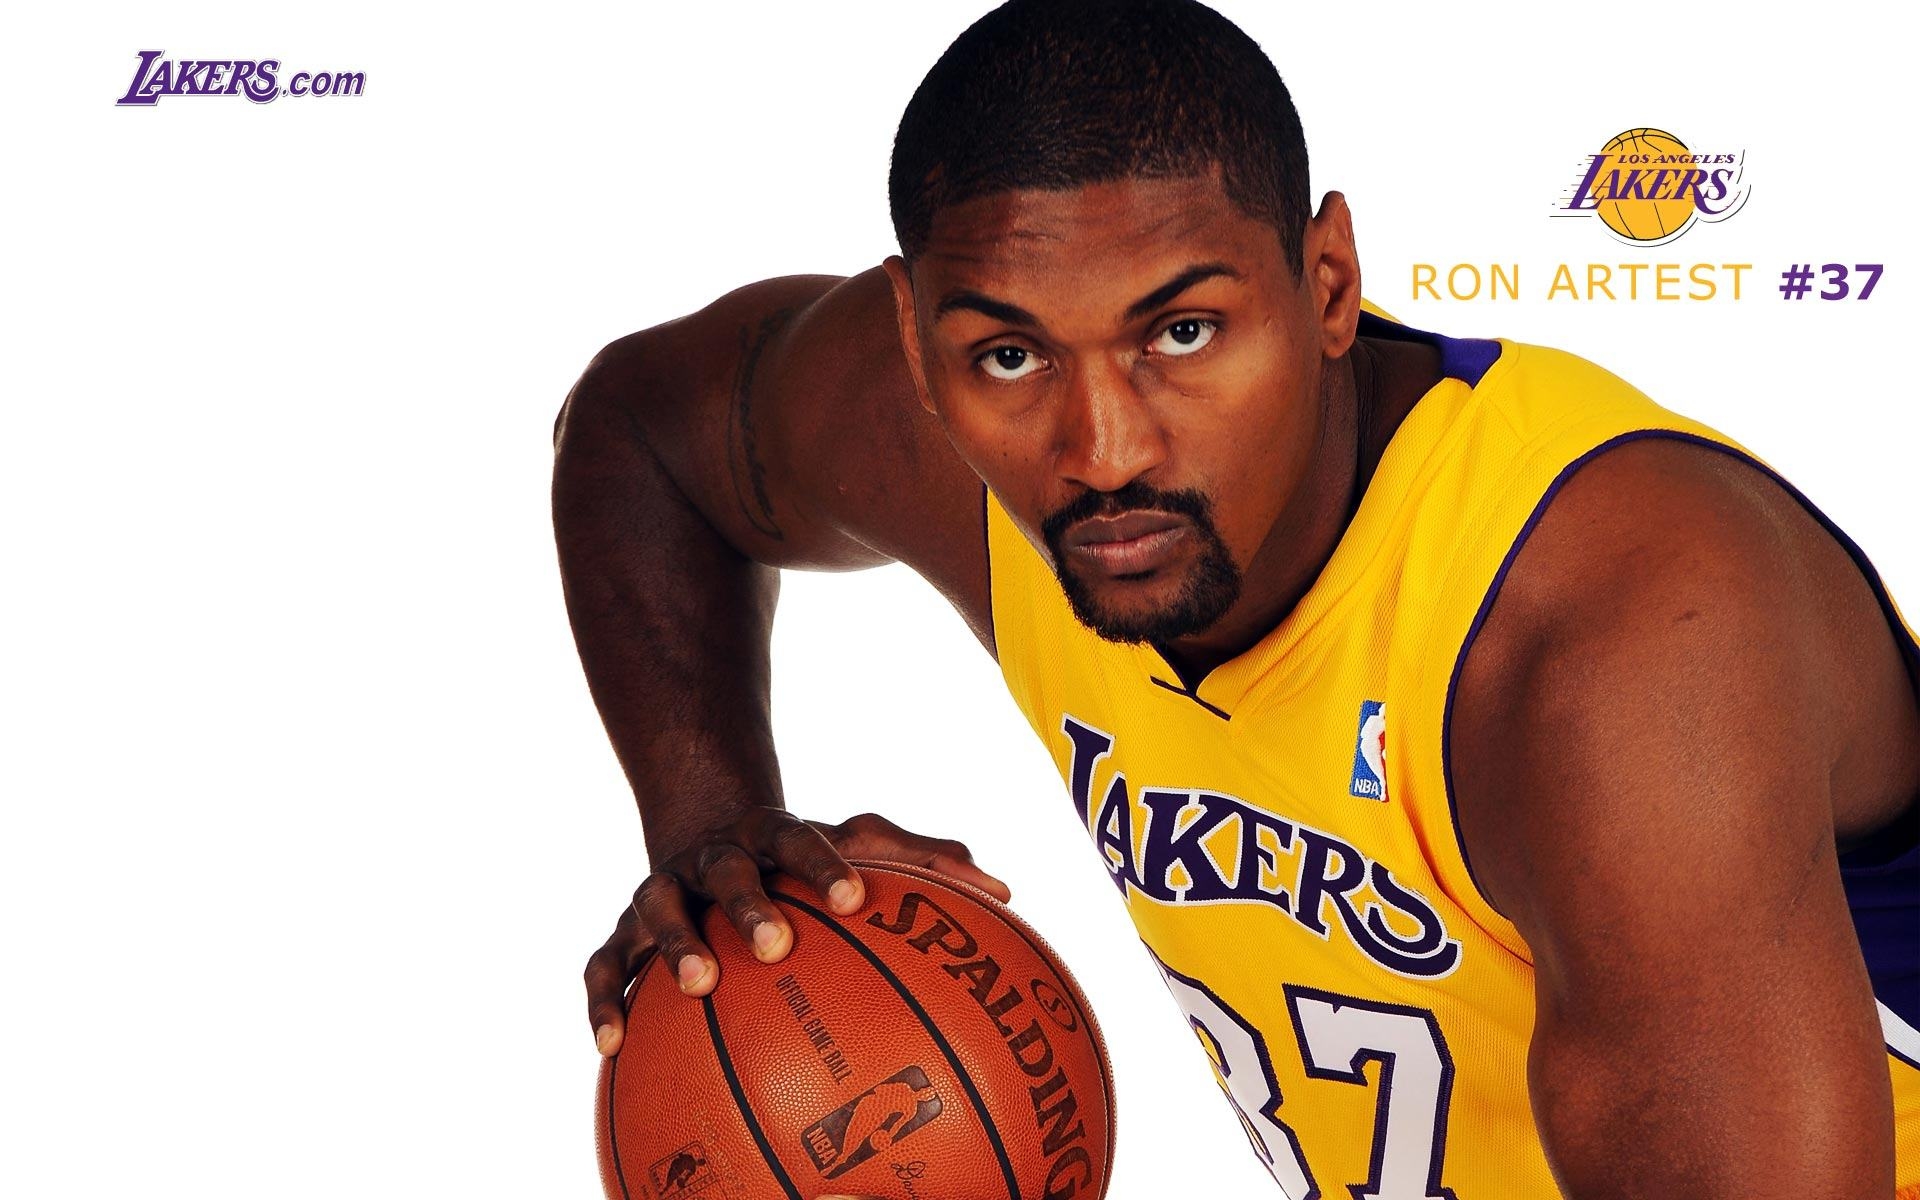 Wallpaper Background Today Adding Widescreen Ron Artest